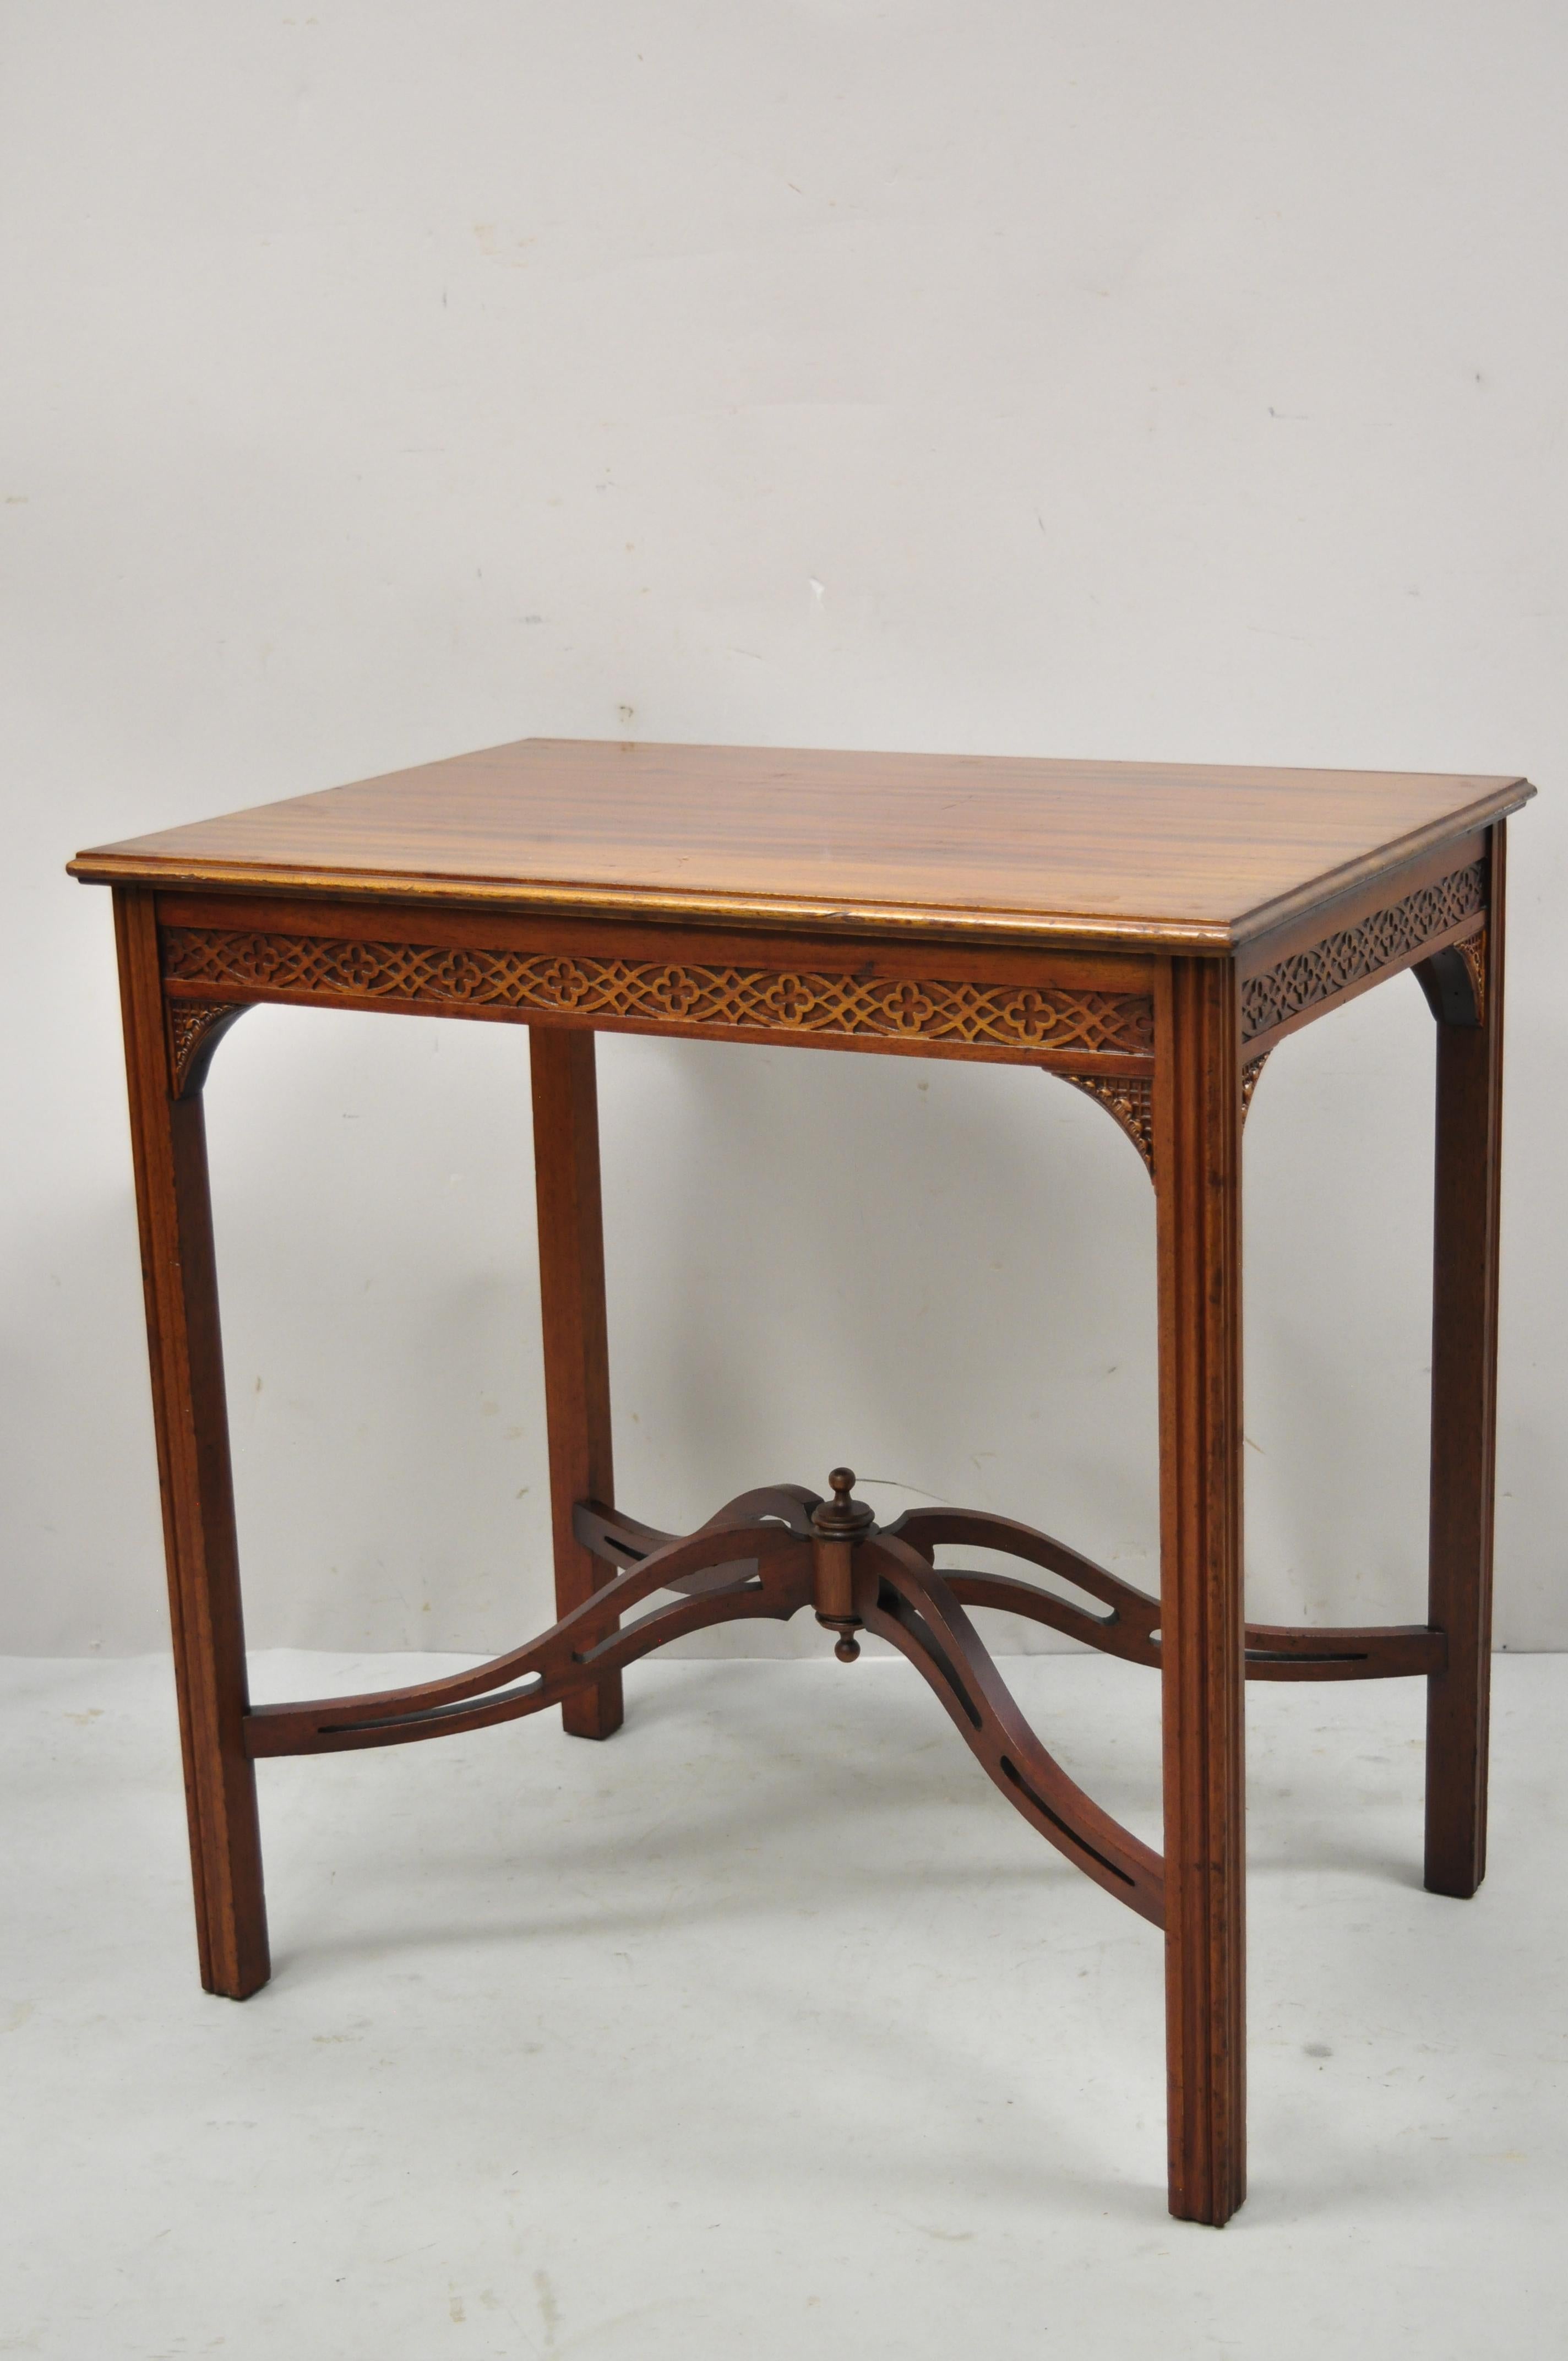 Vintage mahogany Chinese Chippendale fretwork accent lamp side table by Elite Furniture. Item features carved fretwork skirt, cross stretcher base with finial, beautiful wood grain, original label, very nice antique item, quality American